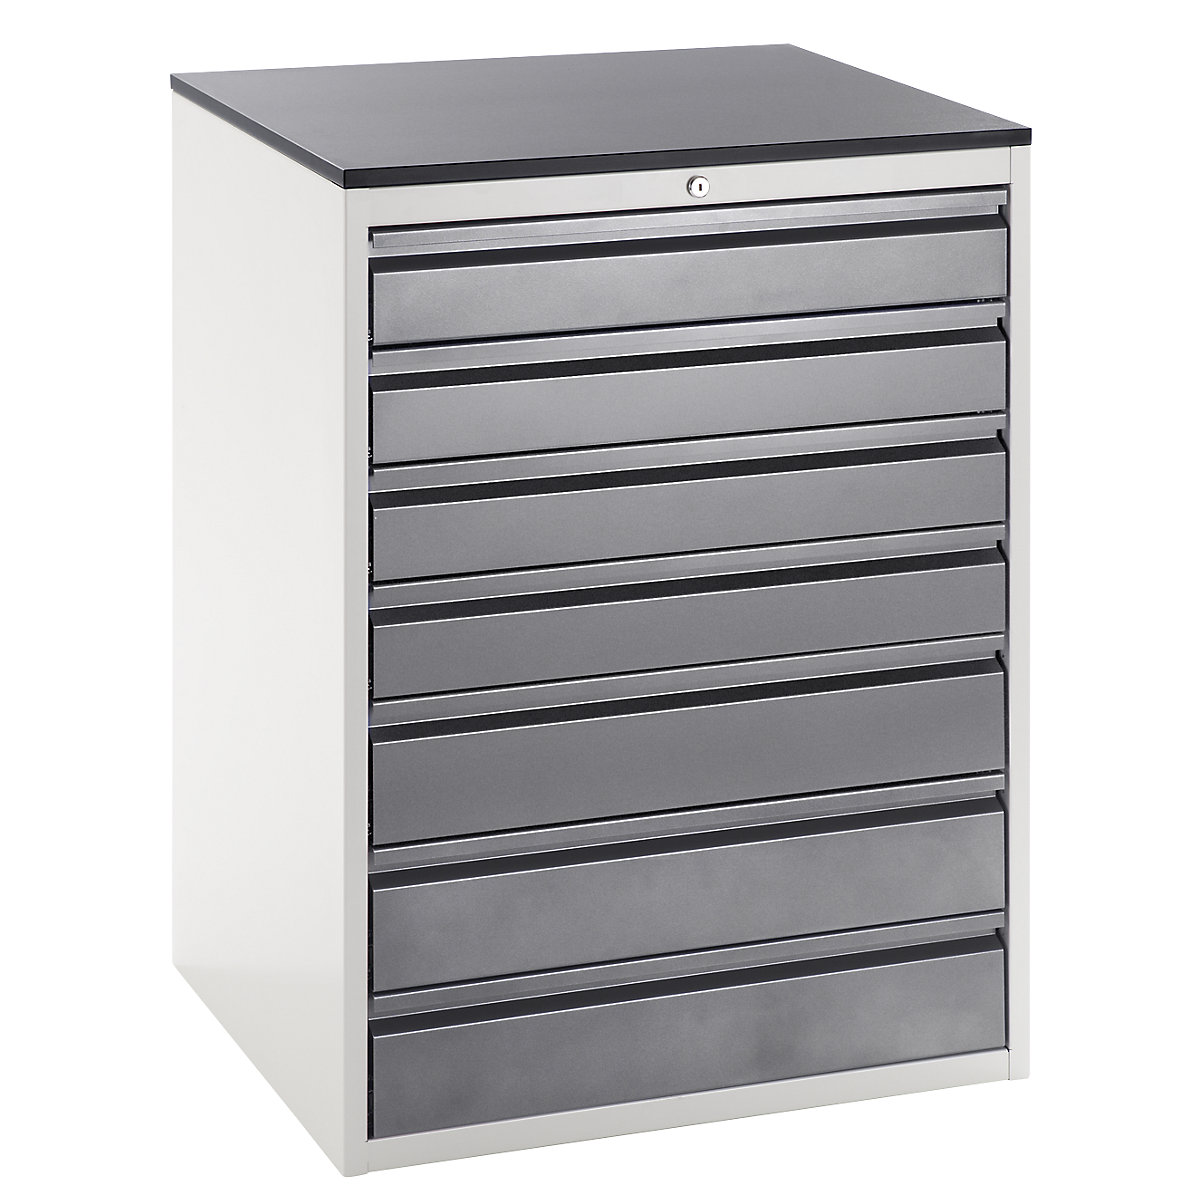 Drawer cupboard with telescopic guides – RAU, height 1030 mm, drawers: 4 x 120, 3 x 150 mm, light grey / charcoal, width 770 mm-8